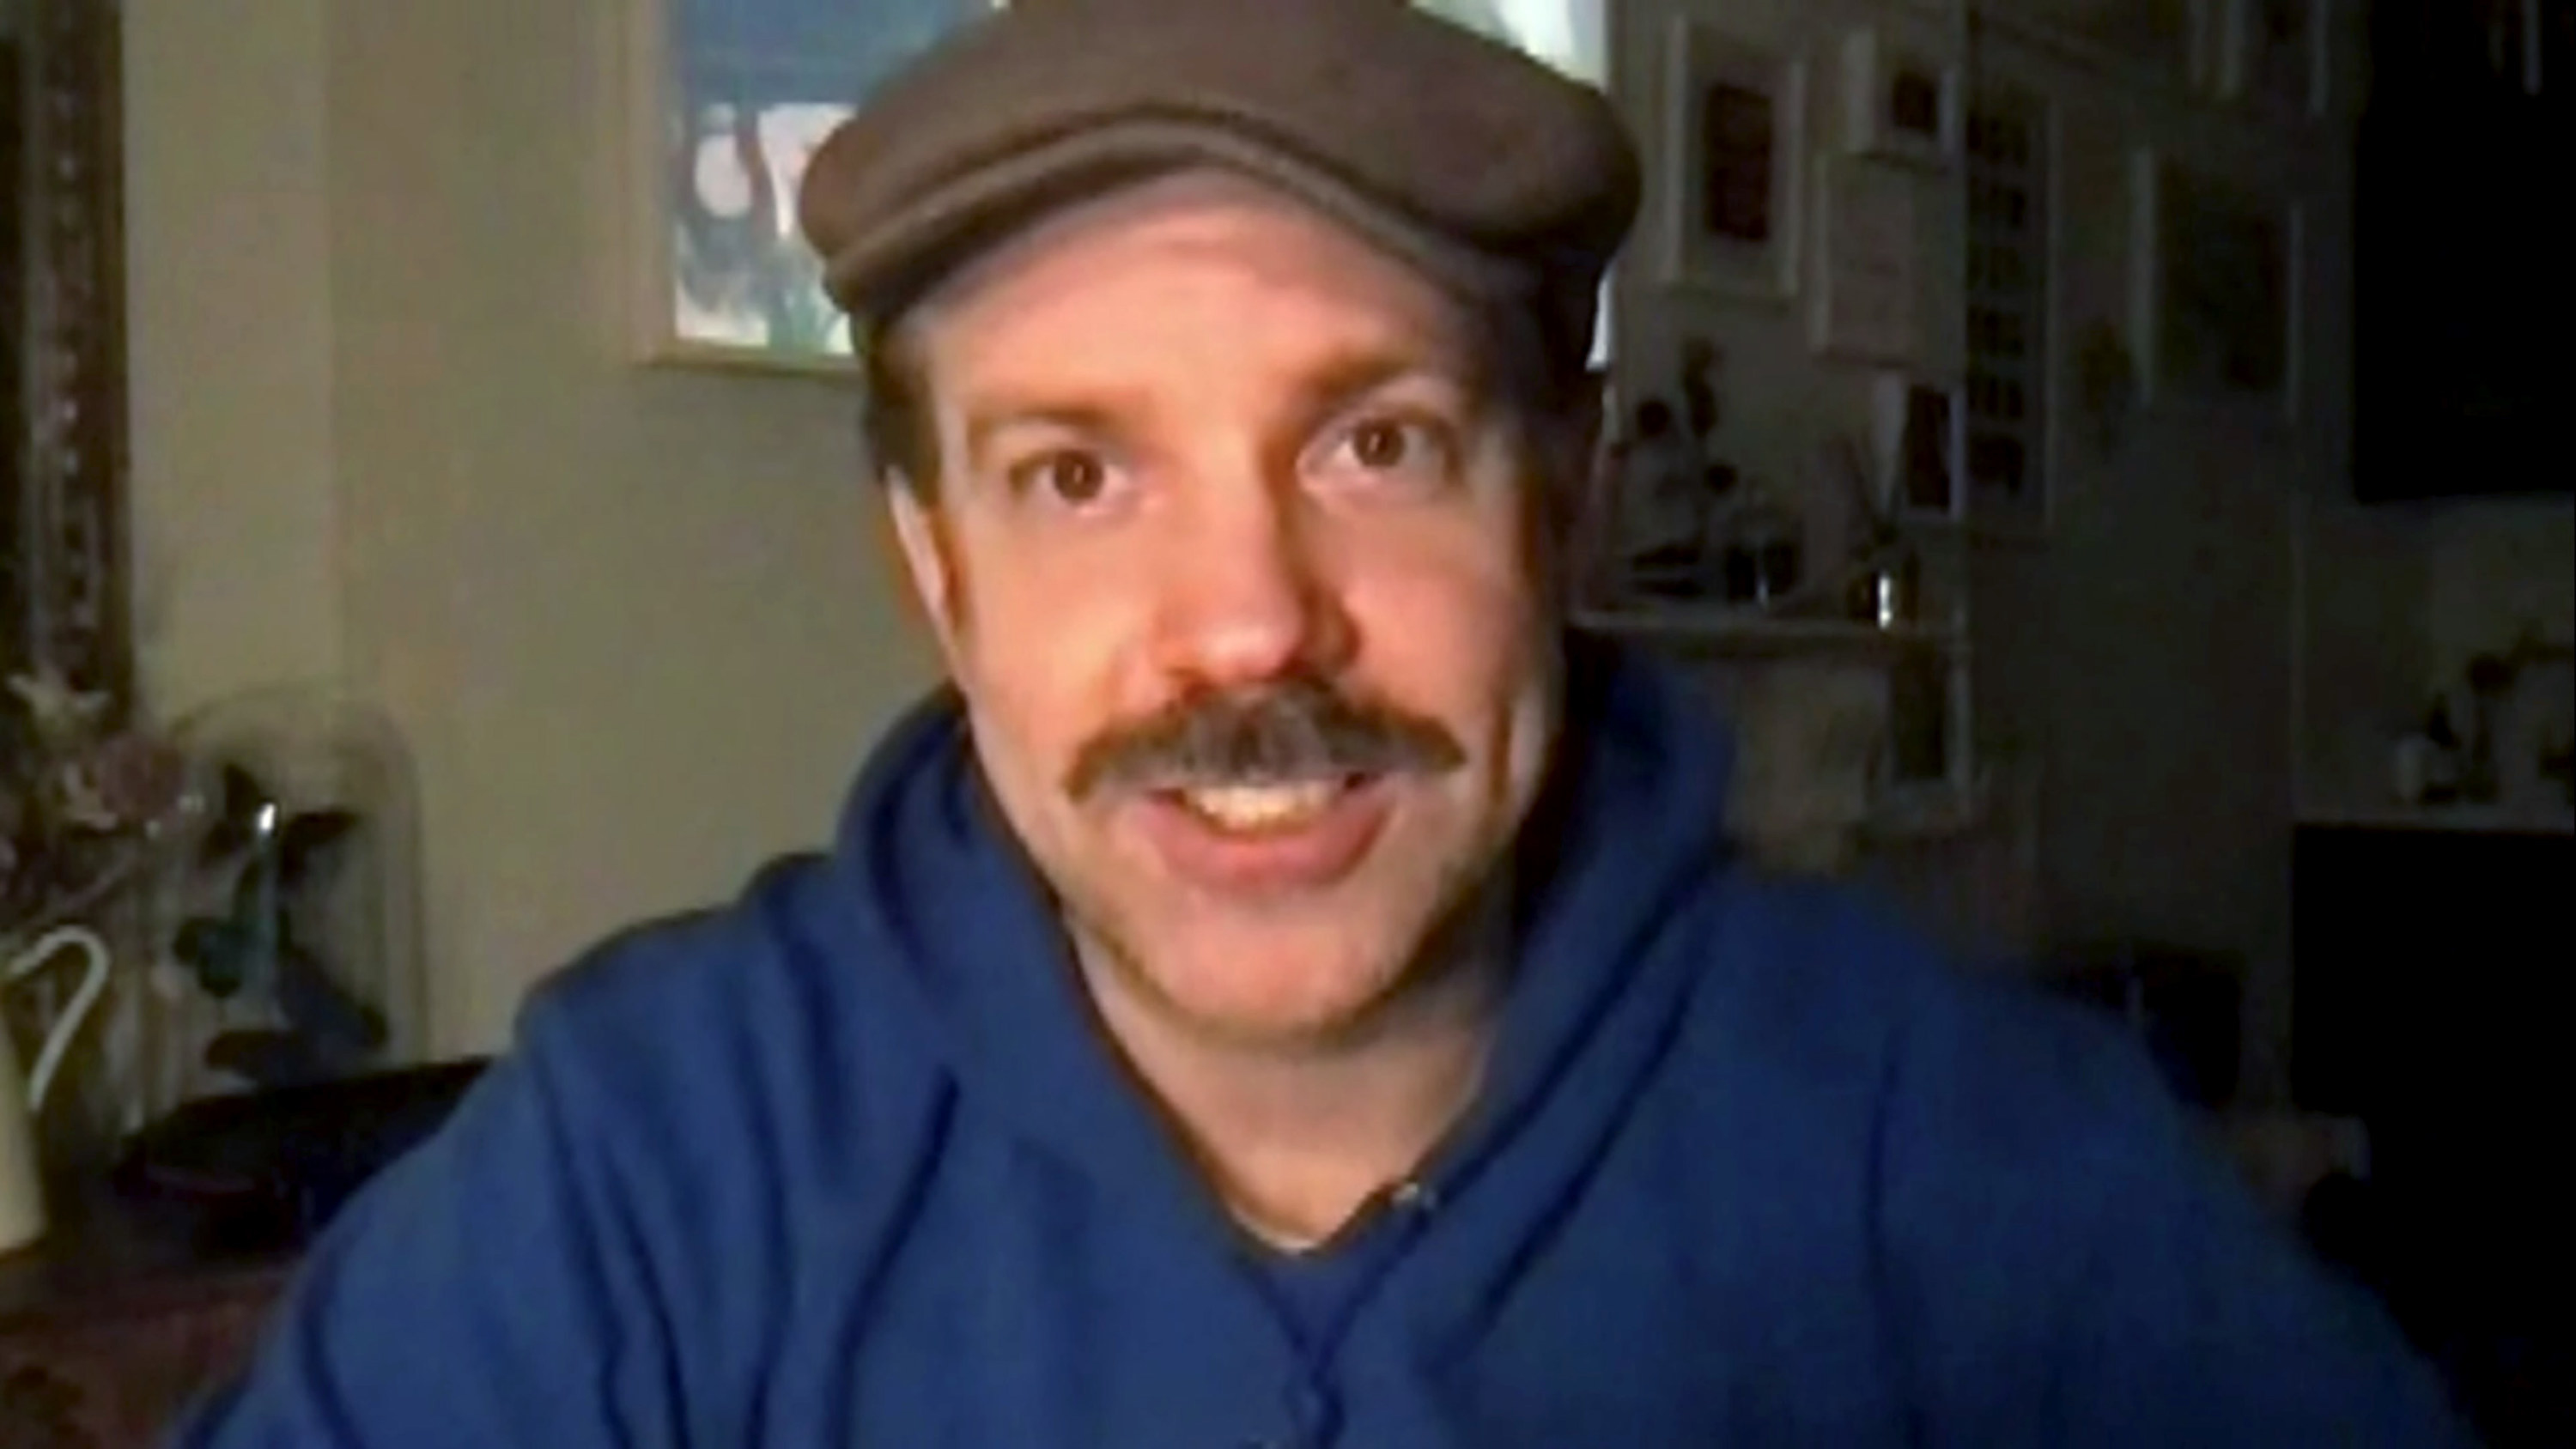 Sudeikis looks into a camera on Zoom while wearing a newsboy hat and sweatshirt